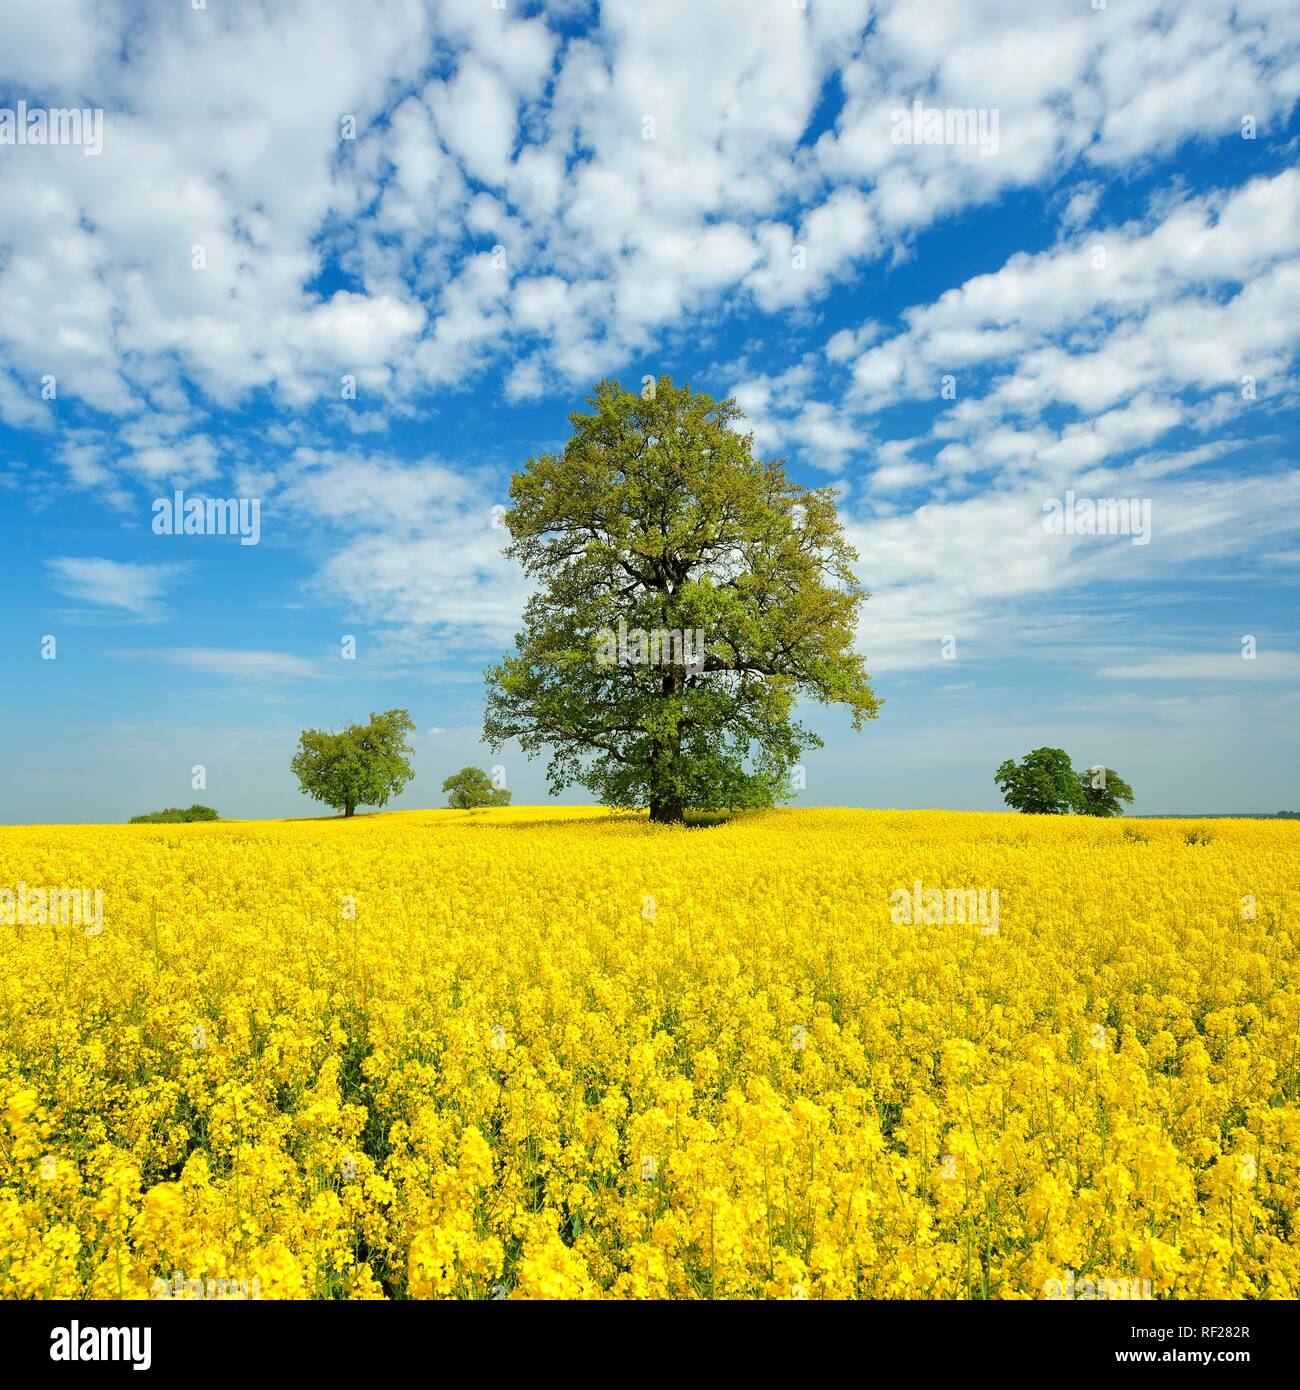 Rape field in bloom with old solitary oaks under a blue sky with sheep clouds, Mecklenburgische Schweiz Stock Photo